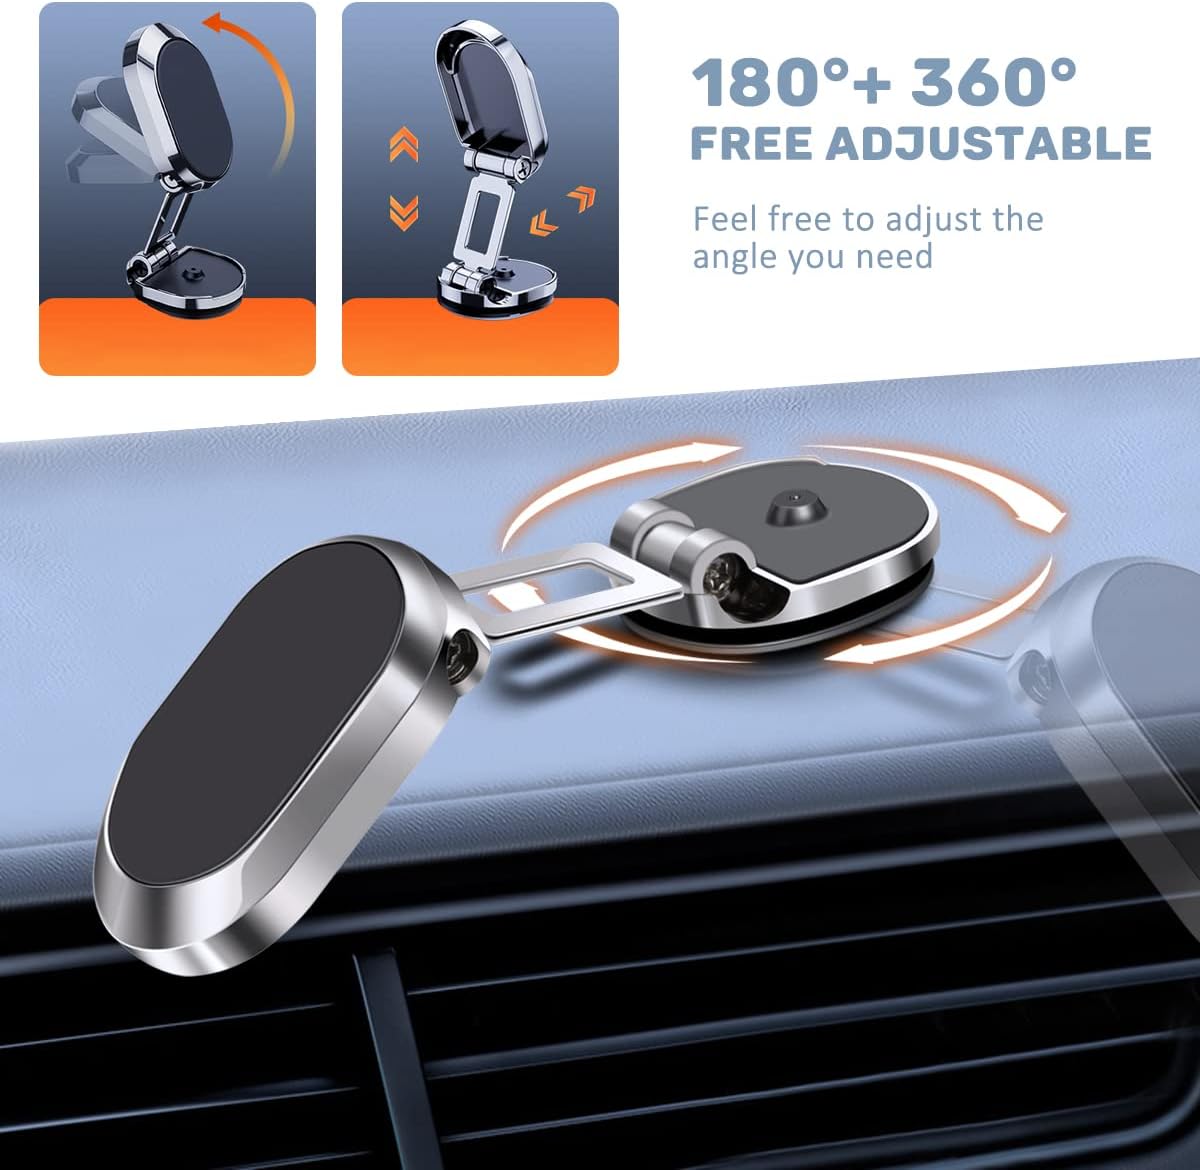 Car Mobile Phone Holder mounted on a car's dashboard and expose the 180° + 360° flexibilty 